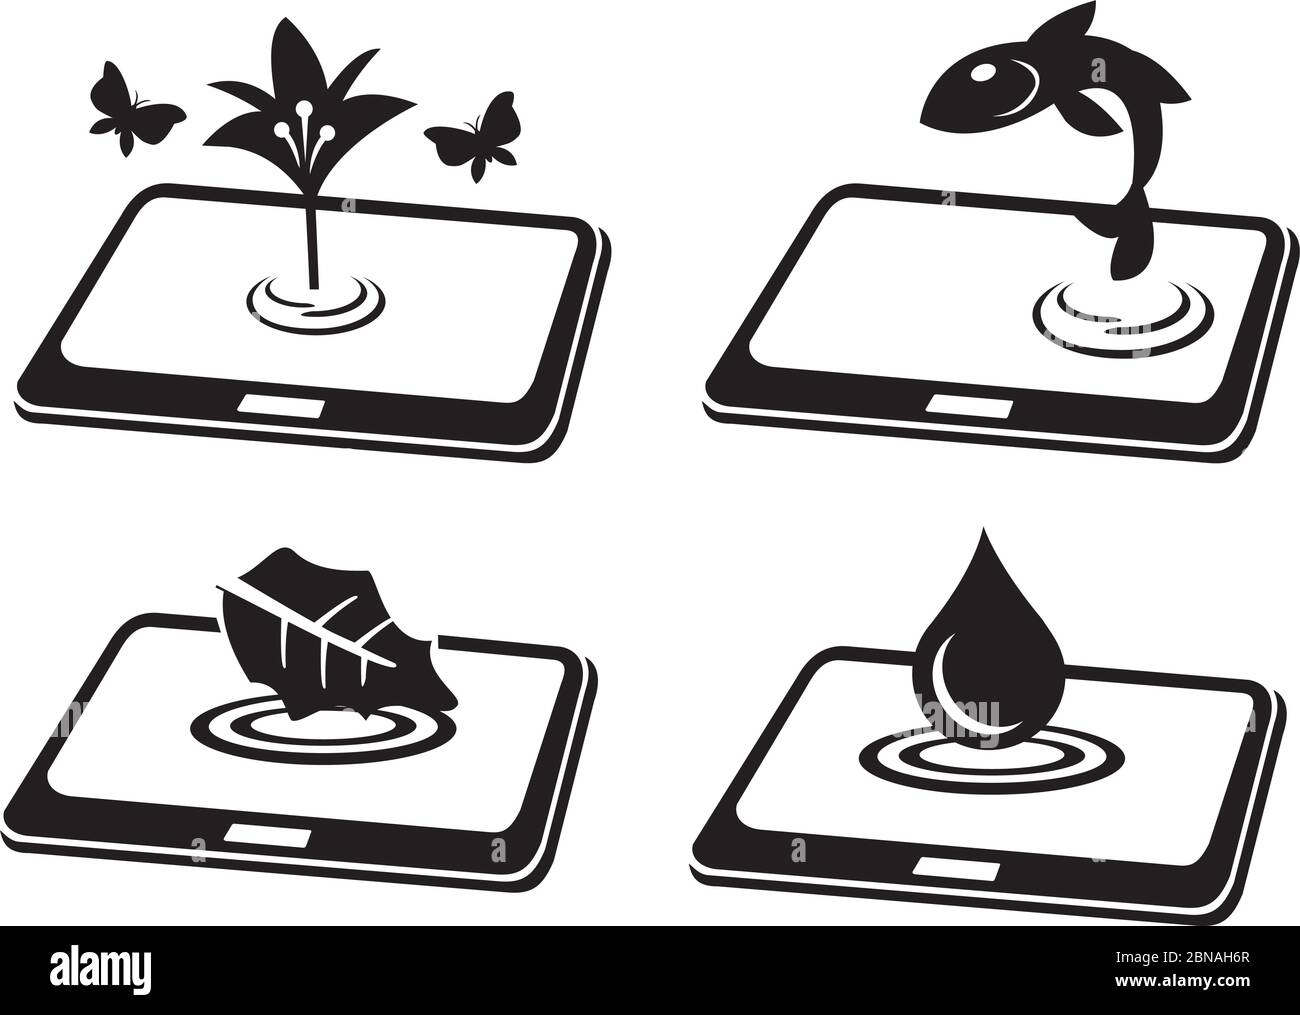 Symbols Of Nature Elements Coming To Life From The Touch Screen Of Digital Tablet Computer Set Of Four Black And White Conceptual Vector Icon Illustr Stock Vector Image Art Alamy